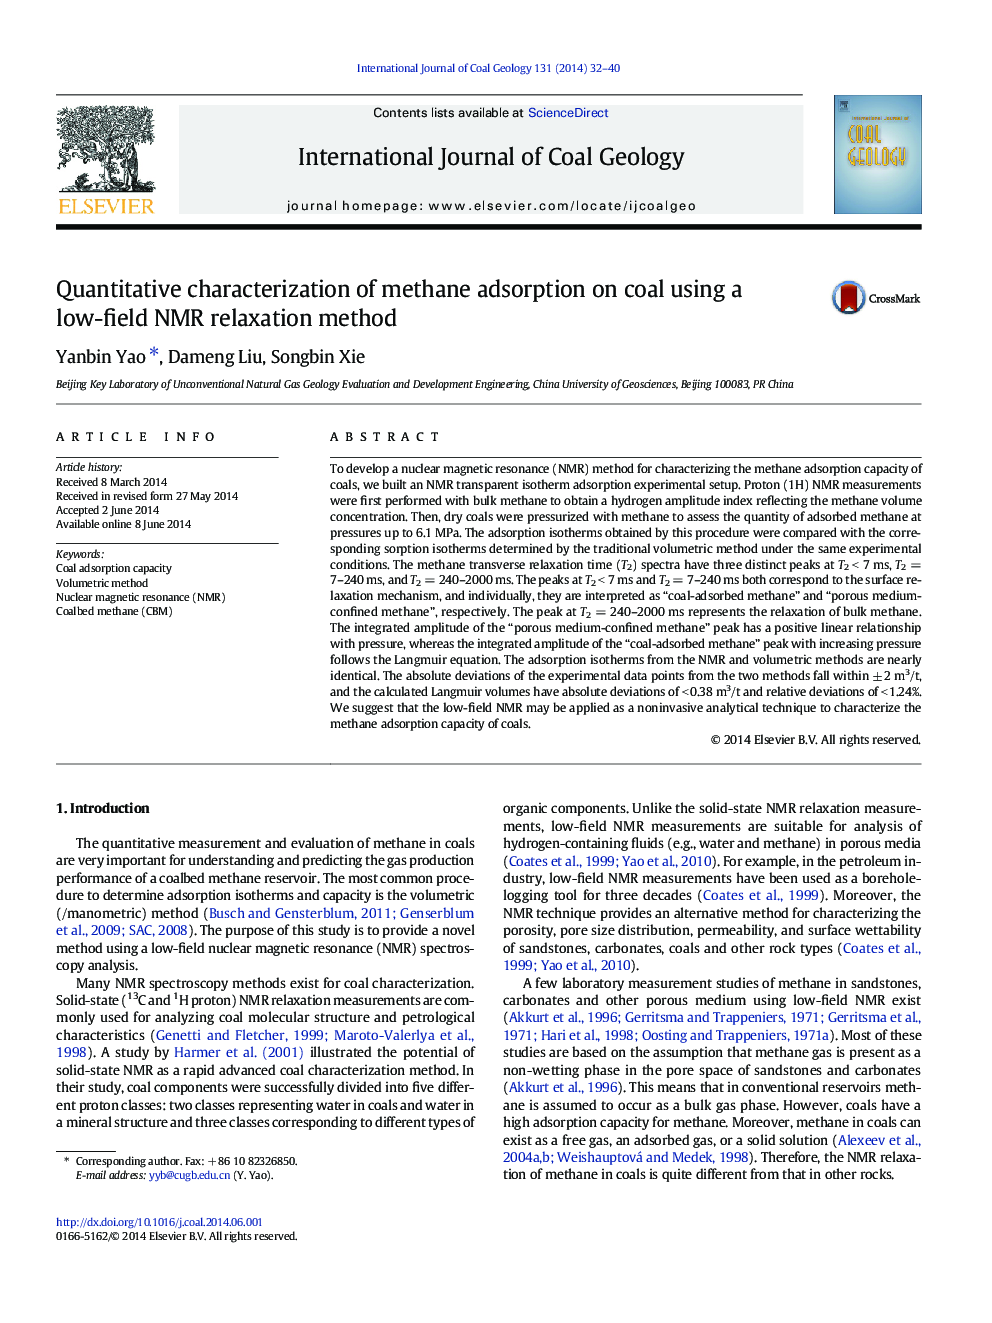 Quantitative characterization of methane adsorption on coal using a low-field NMR relaxation method